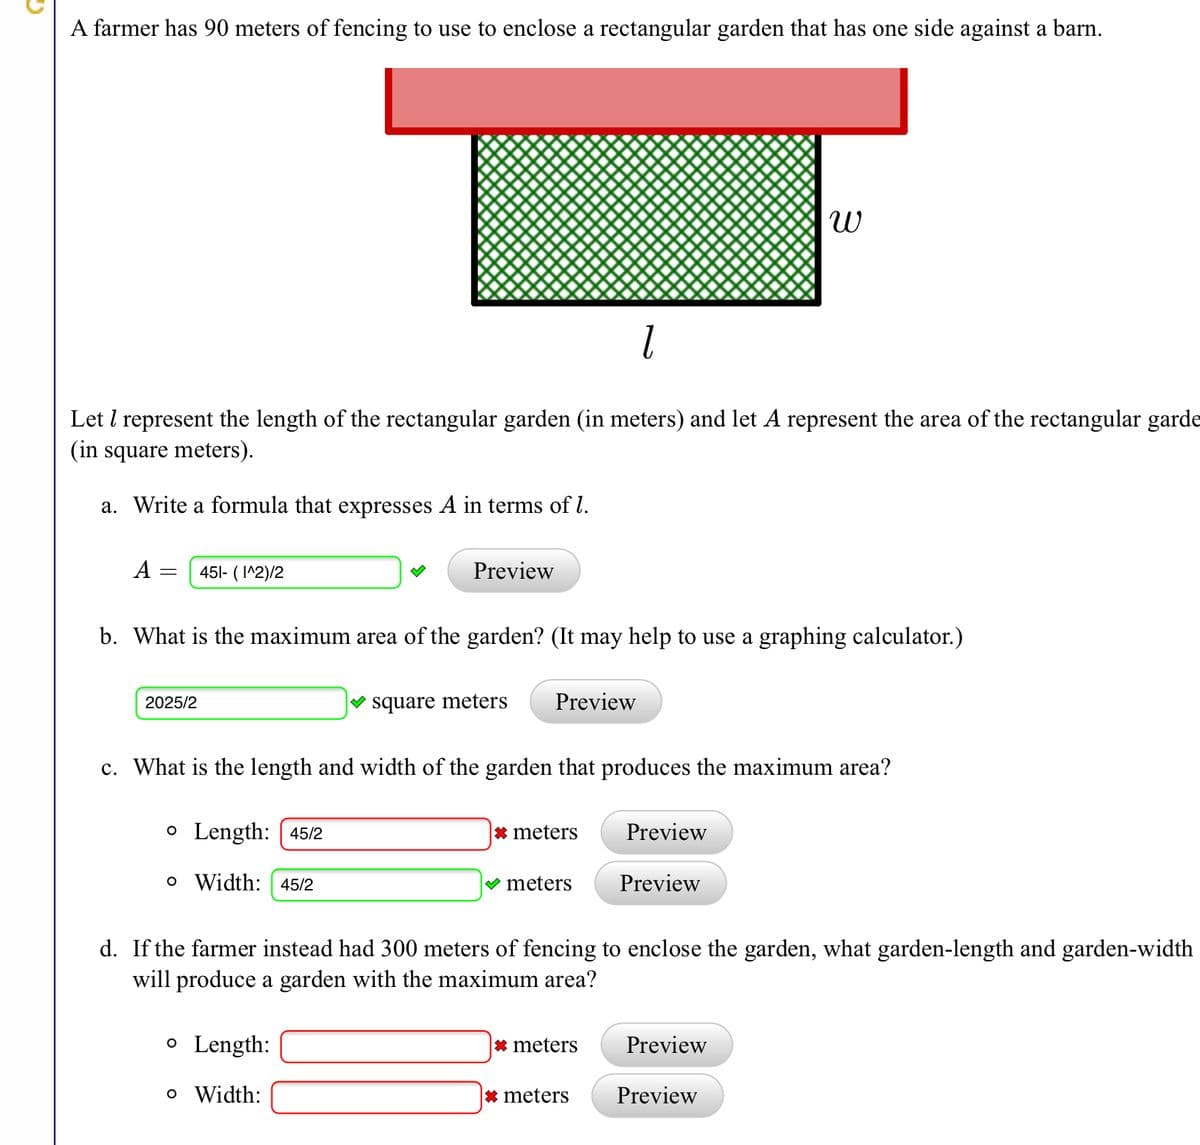 A farmer has 90 meters of fencing to use to enclose a rectangular garden that has one side against a barn.
Let l represent the length of the rectangular garden (in meters) and let A represent the area of the rectangular garde
(in square meters).
a. Write a formula that expresses A in terms of l.
A = 451- ( I^2)/2
Preview
b. What is the maximum area of the garden? (It may help to use a graphing calculator.)
2025/2
square meters
Preview
c. What is the length and width of the garden that produces the maximum area?
o Length: [ 45/2
* meters
Preview
o Width: 45/2
V meters
Preview
d. If the farmer instead had 300 meters of fencing to enclose the garden, what garden-length and garden-width
will produce a garden with the maximum area?
o Length:
* meters
Preview
o Width:
* meters
Preview
